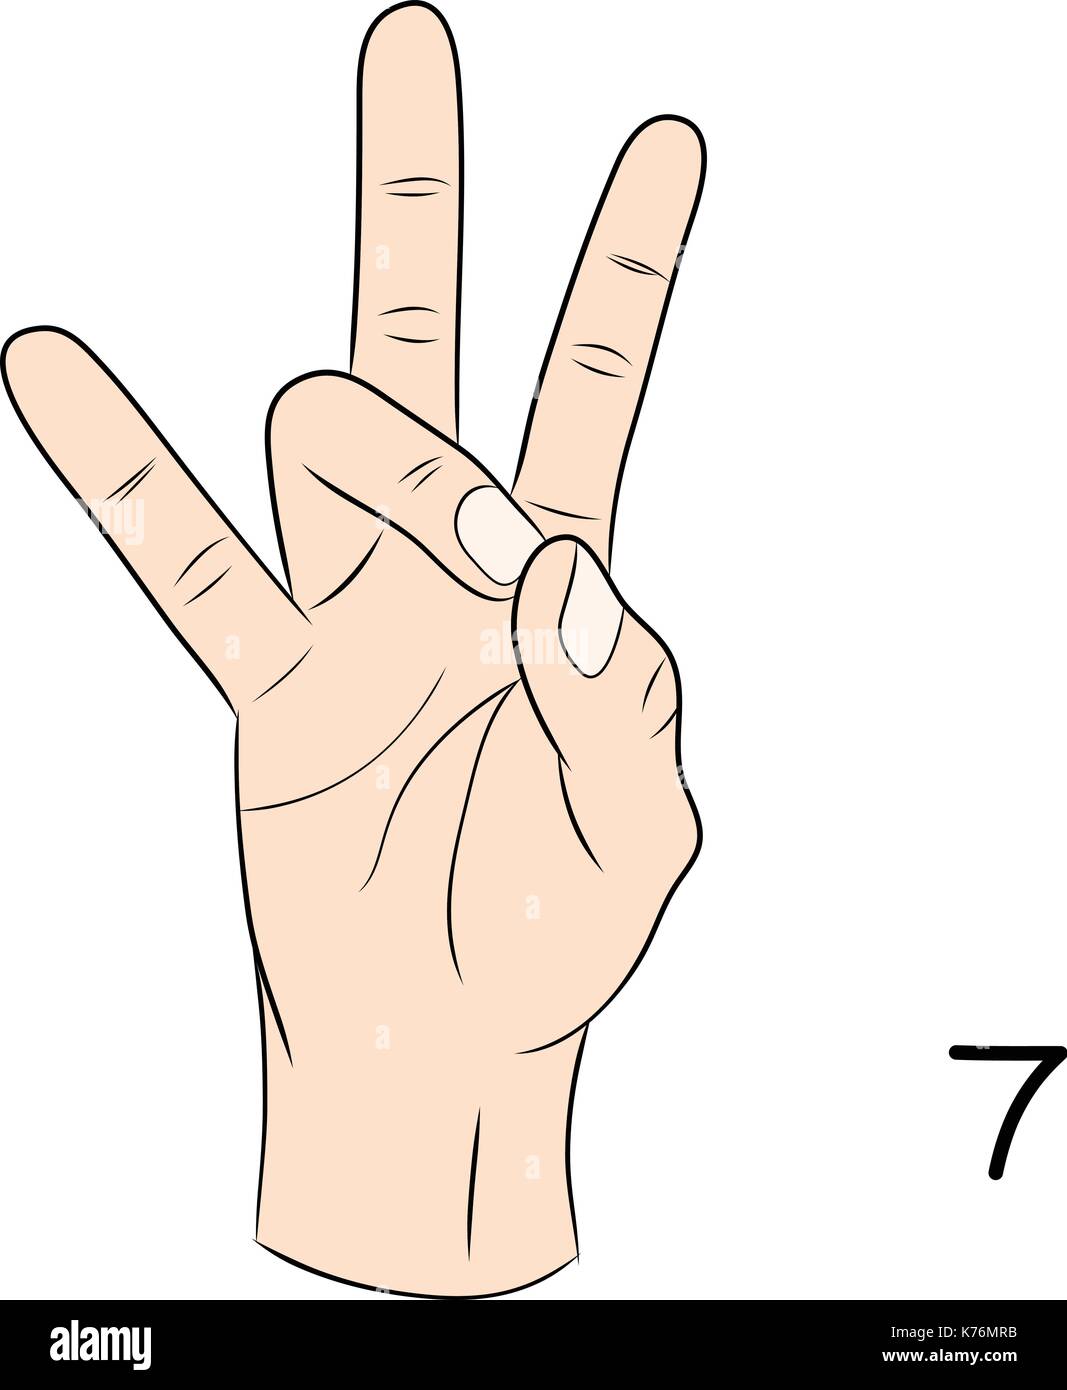 Sign language,Number 7 Stock Vector